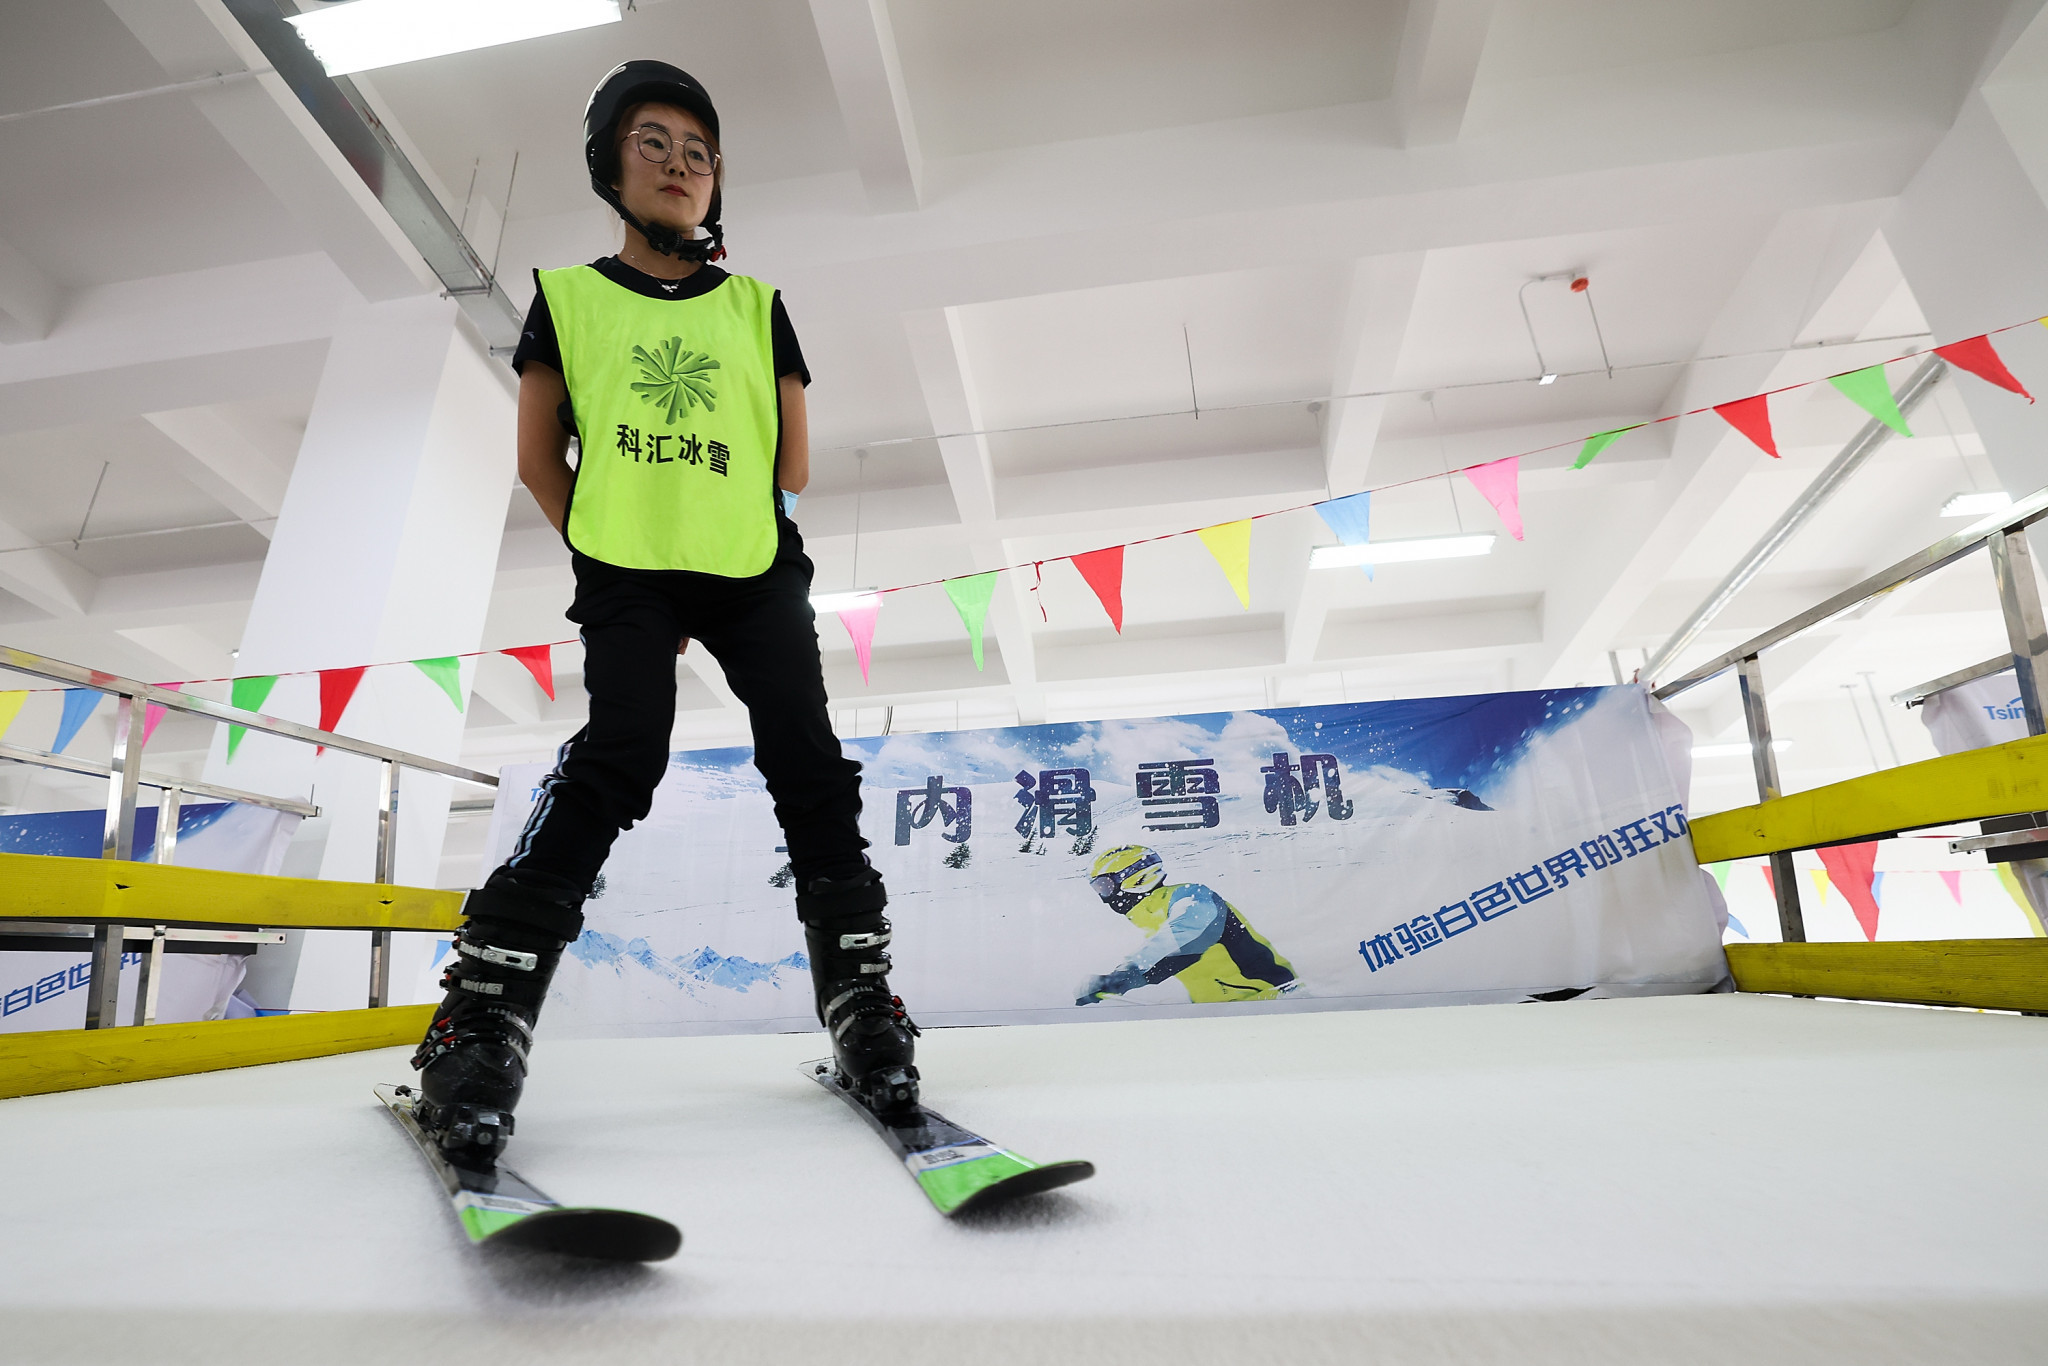 The exhibition is part China's aim to having 300 million people involved in winter sports by the 2022 Games ©Getty Images